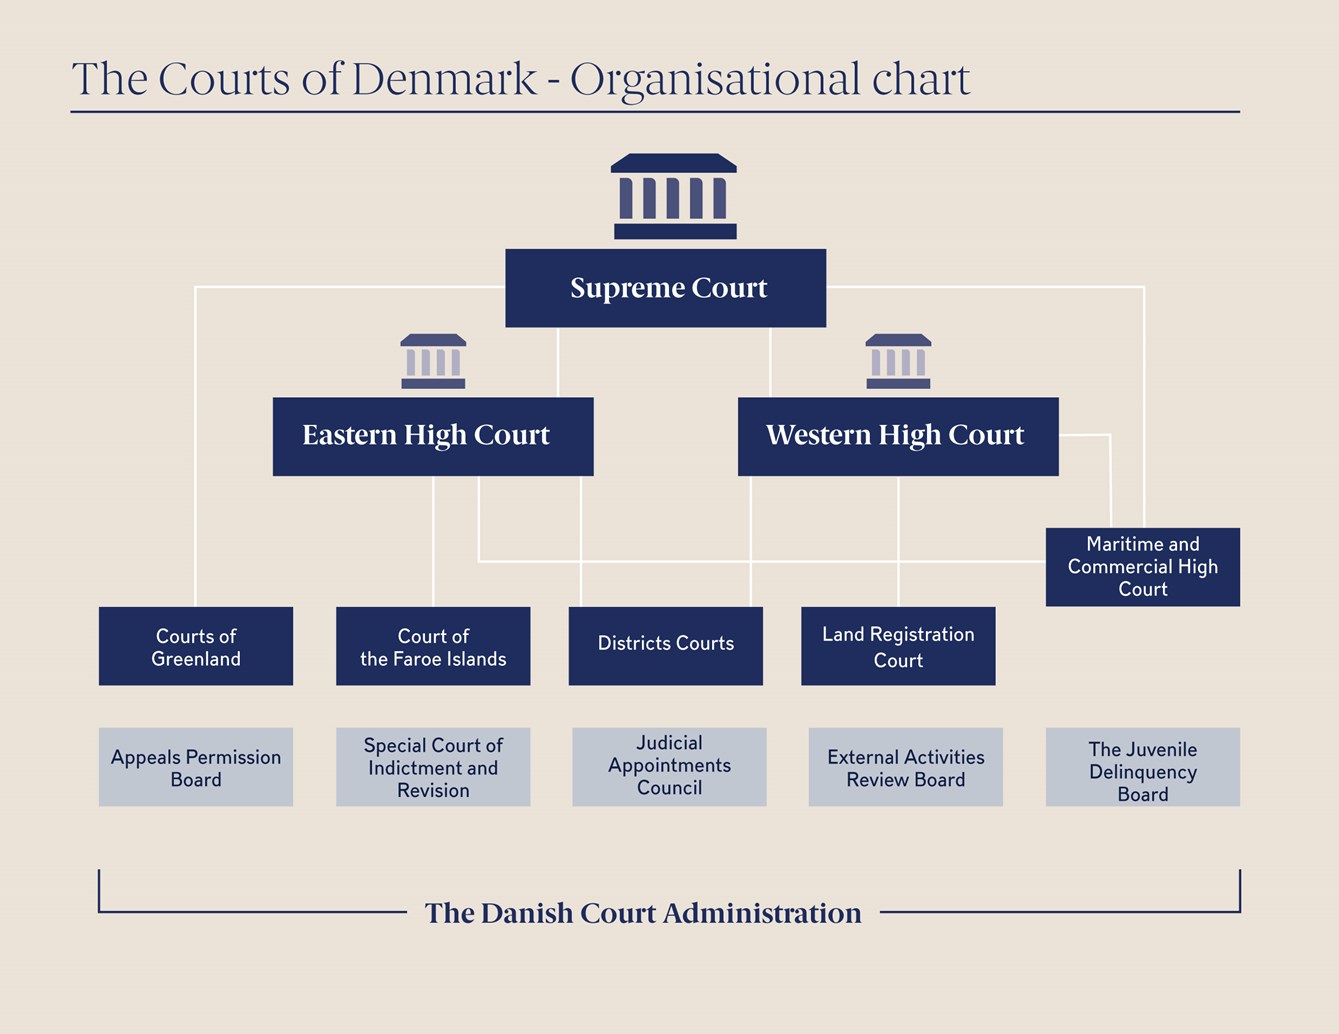 This is a picture of the structure of the Courts of Denmark